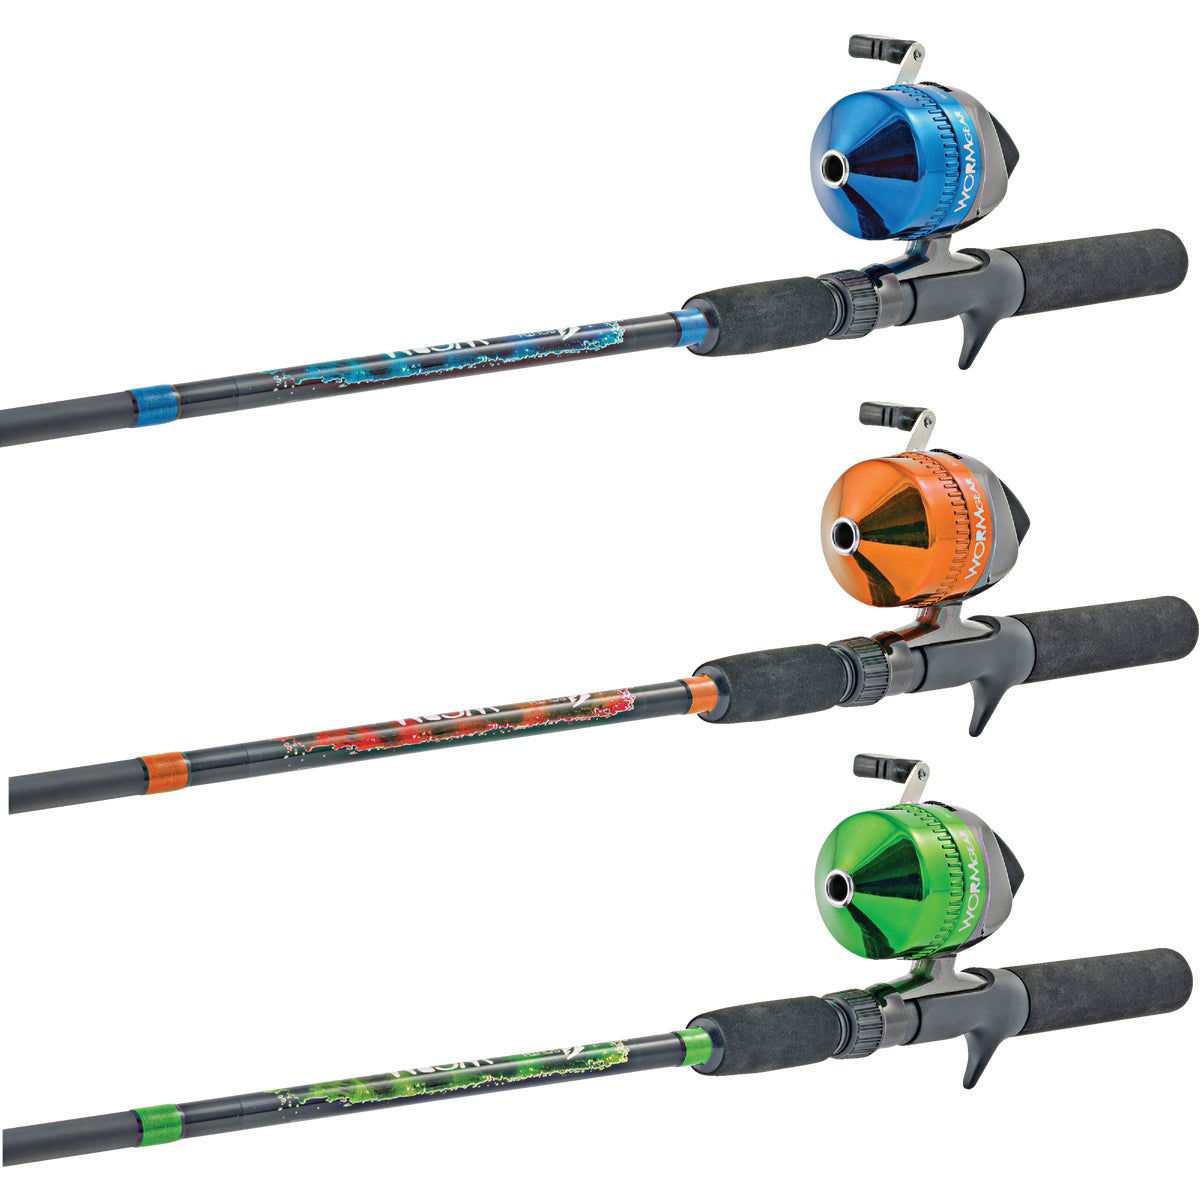 Tailored Tackle Universal Multispecies Rod and Reel Combo Fishing